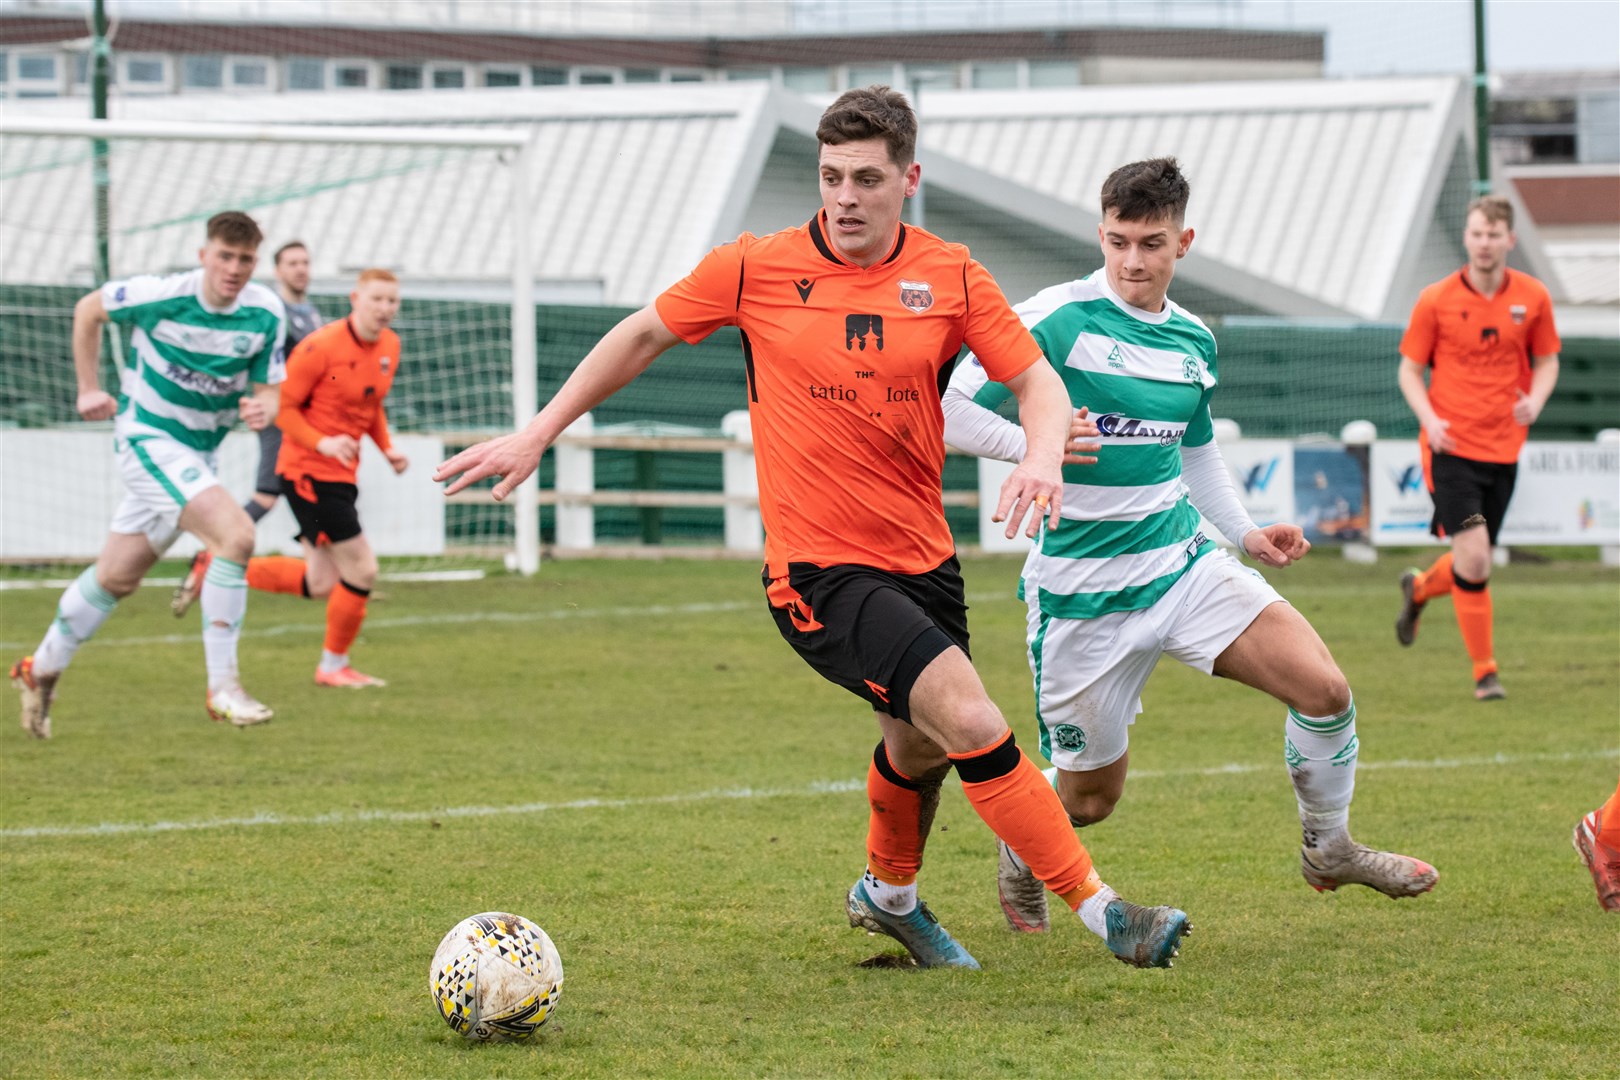 Rothes' Alan Pollock ahead of Buckie Thistle's Max Barry...Buckie Thistle FC (1) vs Rothes FC (1) - Highland Football League 22/23 - Victoria Park, Buckie 18/03/2023...Picture: Daniel Forsyth..